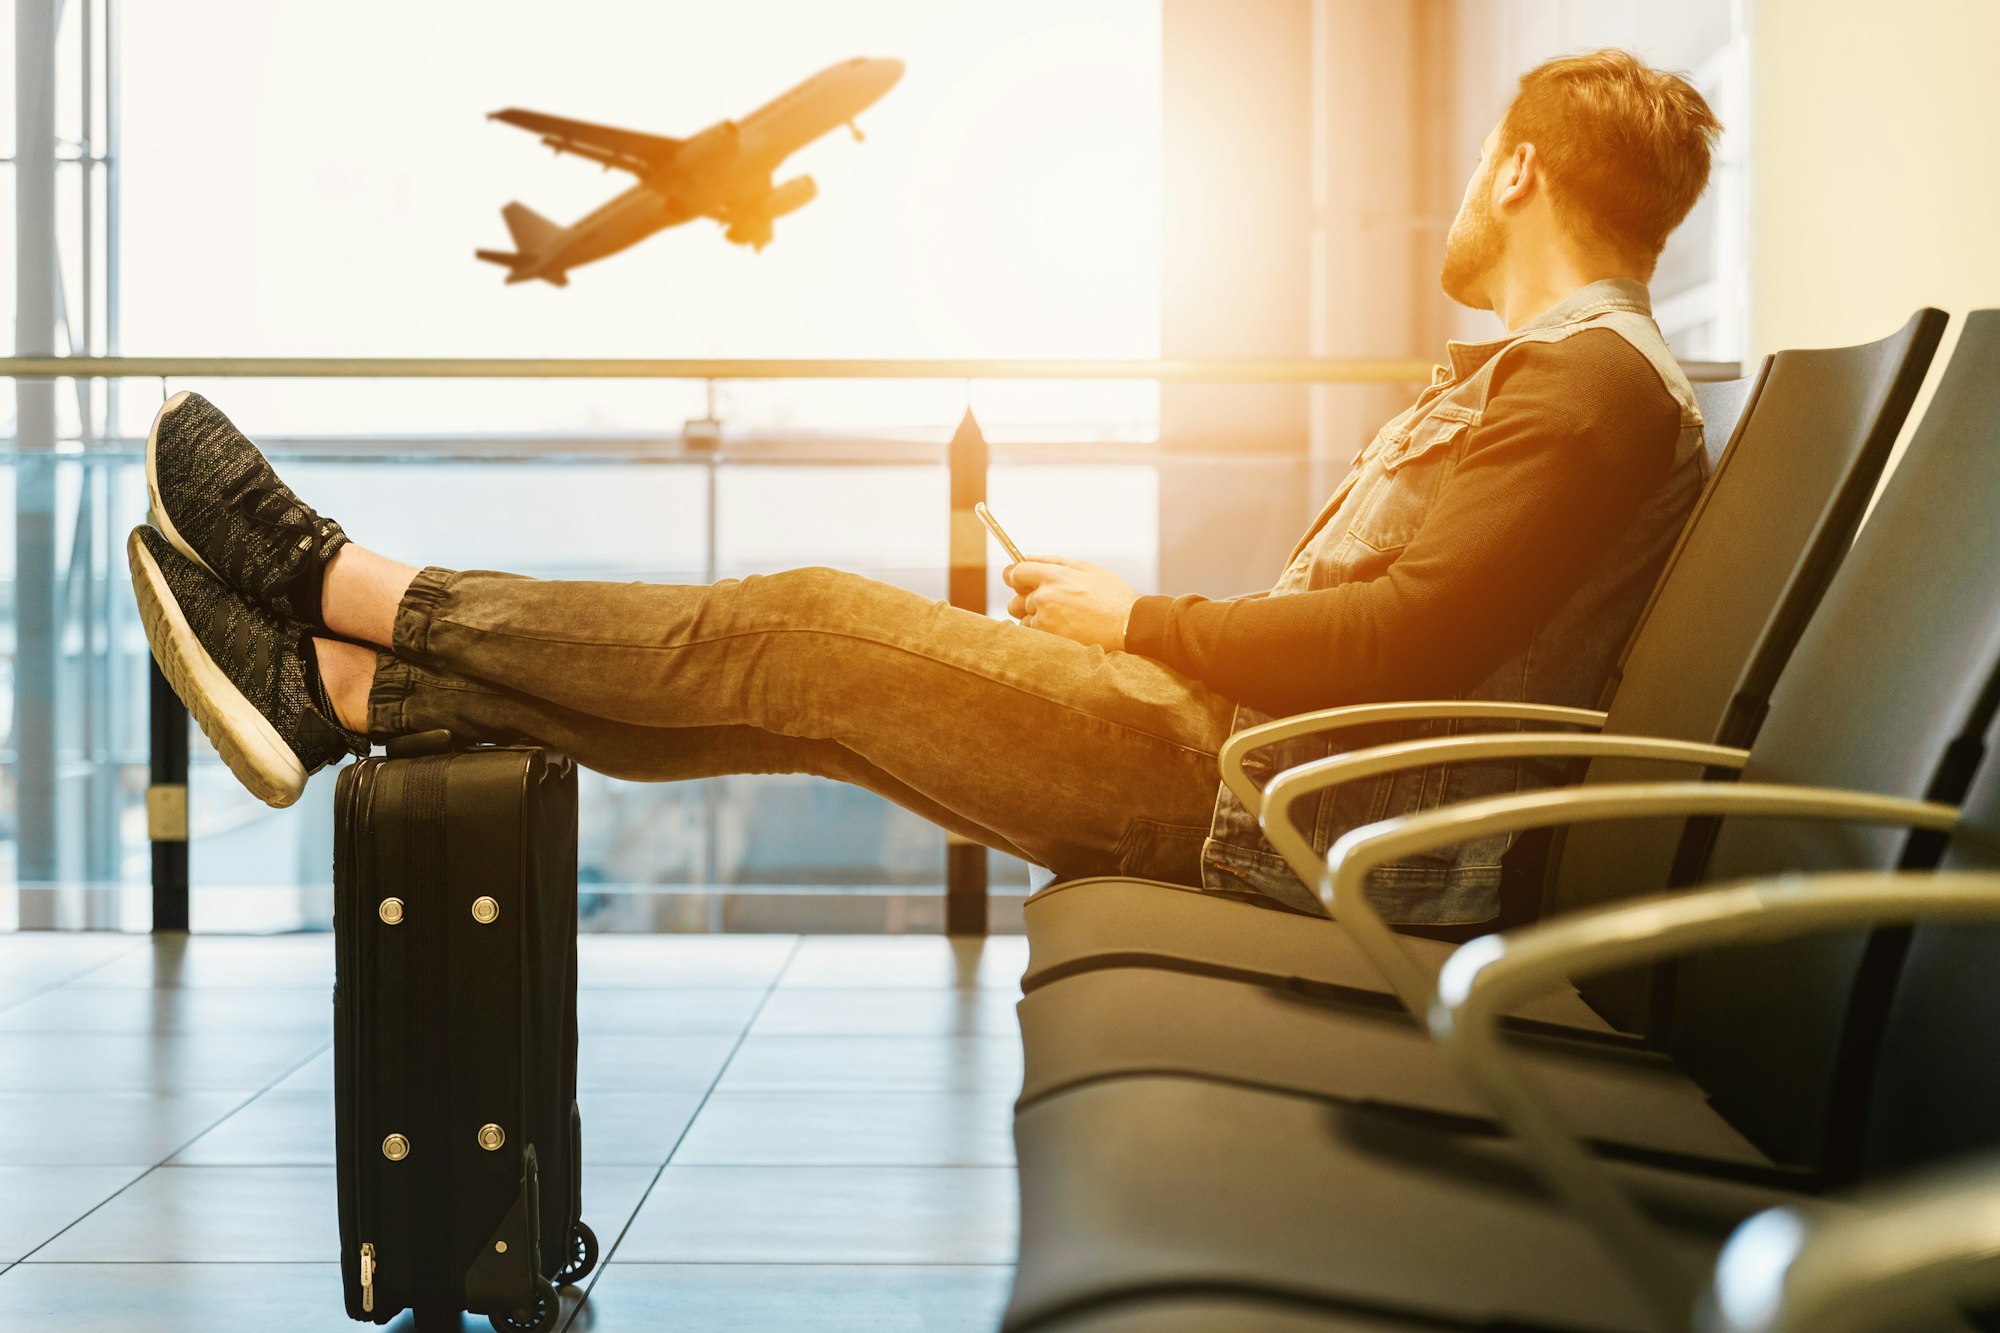 After The Lockdown: How COVID-19 is Changing Travel